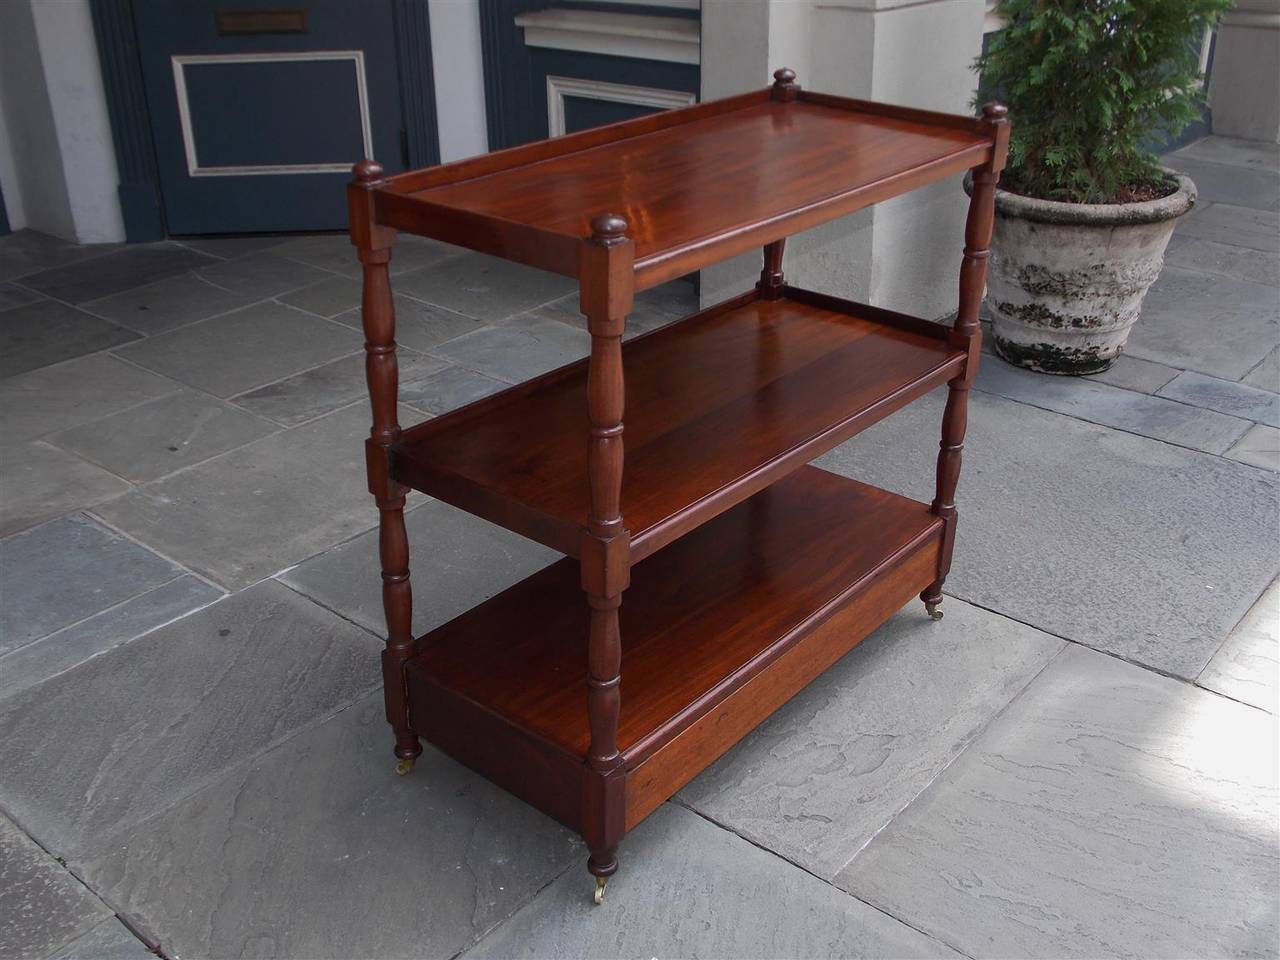 English mahogany three-tiered trolley with squared turned ringed bulbous post, ball finials, single lower drawer and terminating on original brass casters. Trolley is finished on all sides, Early 19th century.